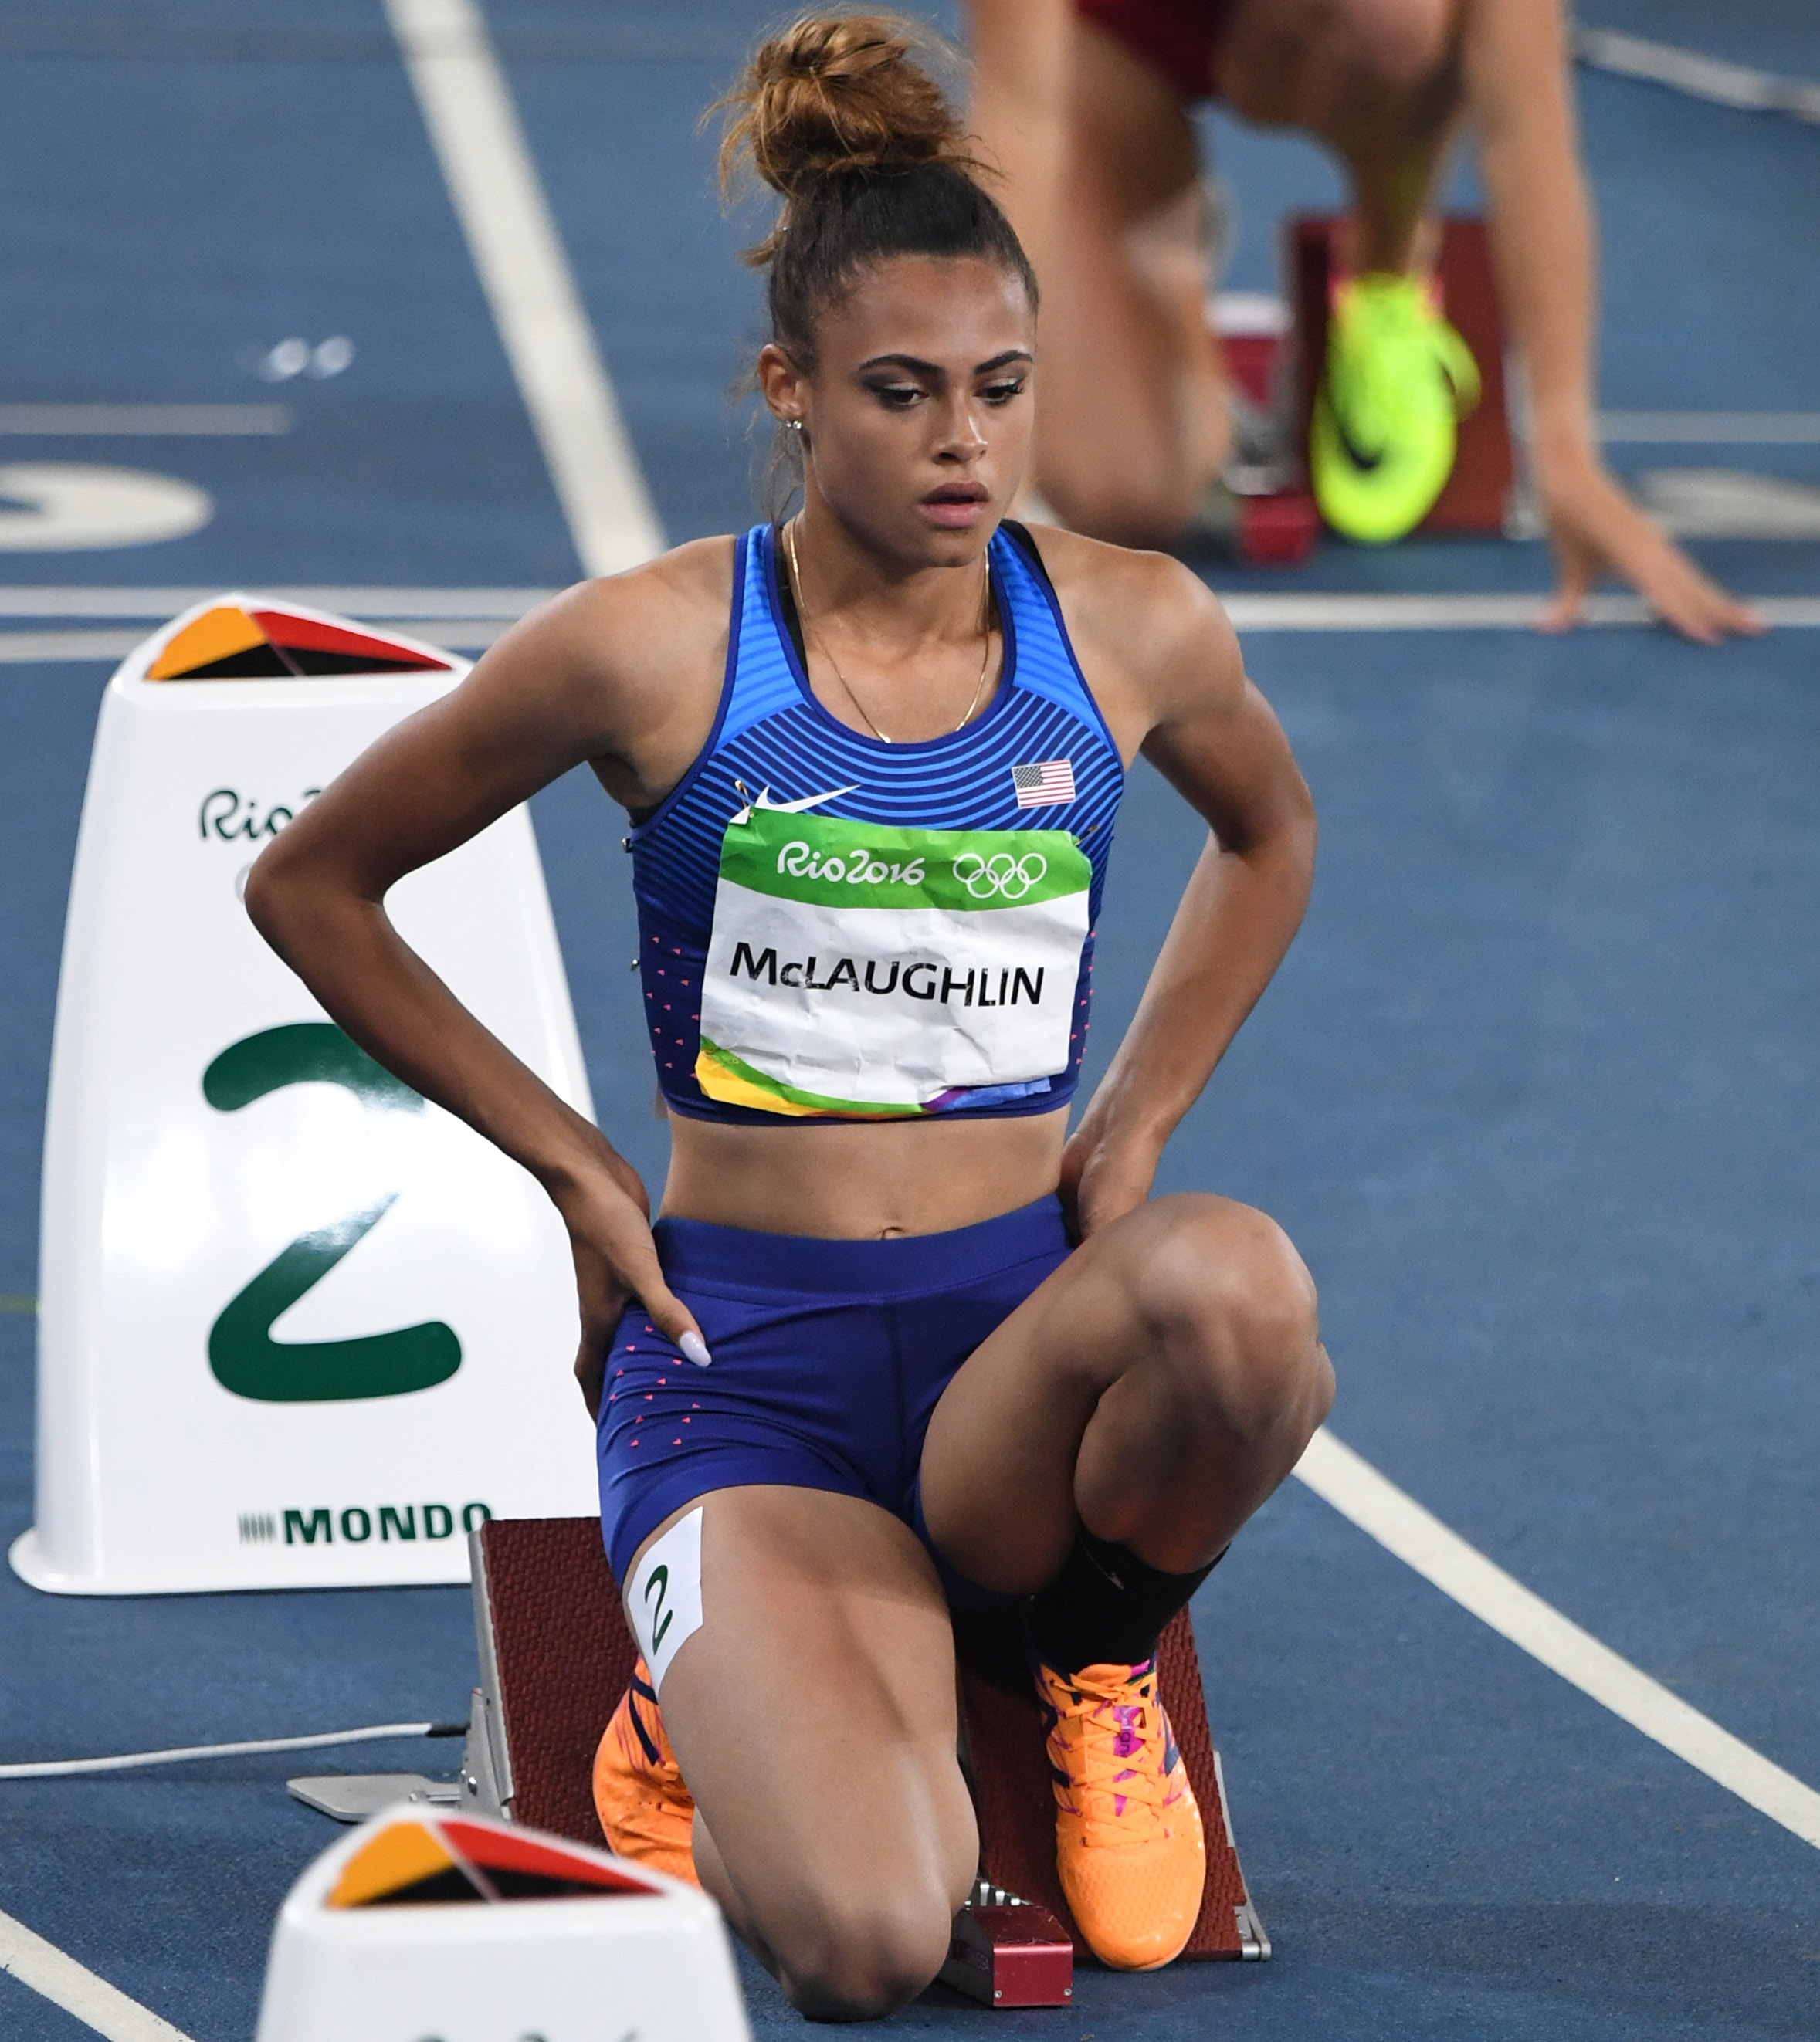 Aug 16, 2016; Rio de Janeiro, Brazil; Sydney McLaughlin (USA) competes in women's 400m hurdles during track and field competition in the Rio 2016 Summer Olympic Games at Estadio Olimpico Joao Havelange. Mandatory Credit: Kyle Terada-USA TODAY Sports ORG XMIT: USATSI-GRP-888 ORIG FILE ID: 20160816_sal_st3_0325.JPG